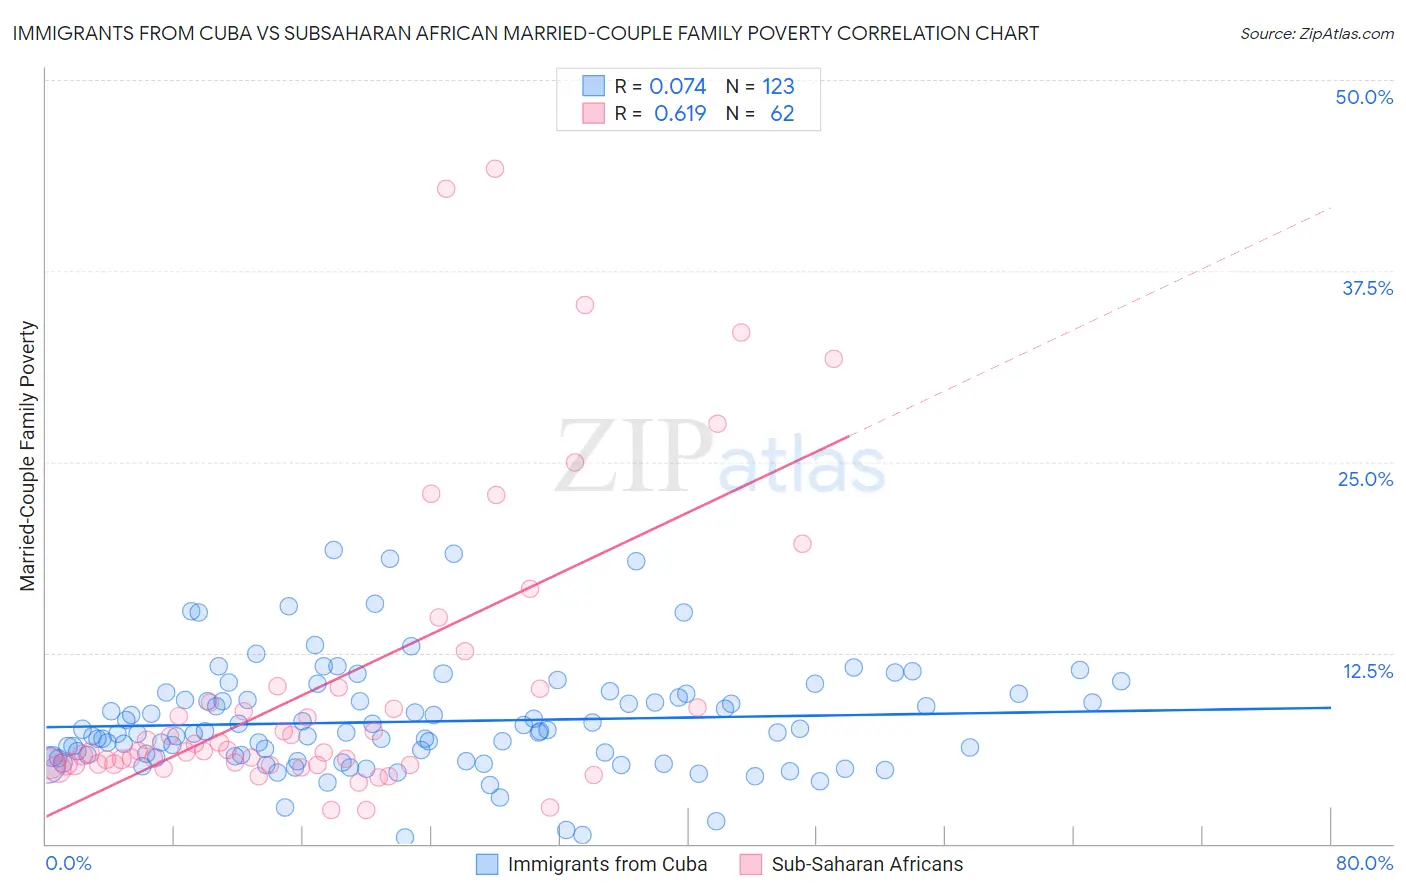 Immigrants from Cuba vs Subsaharan African Married-Couple Family Poverty